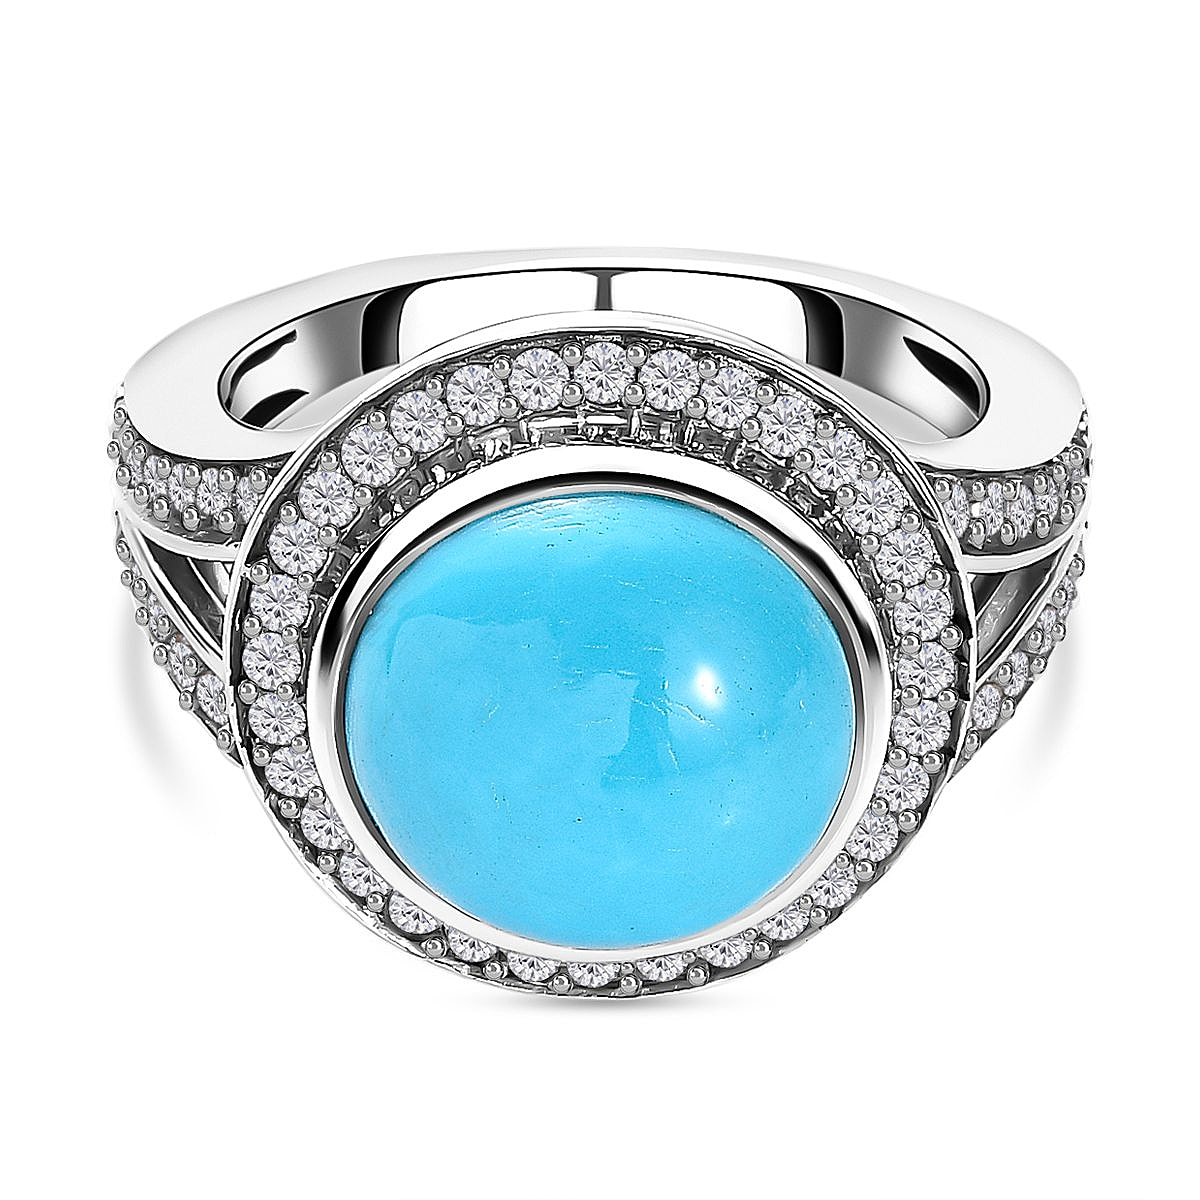 Arizona Sleeping Beauty Turquoise and Natural Zircon Ring in Platinum Overlay Sterling Silver 4.83 Ct.